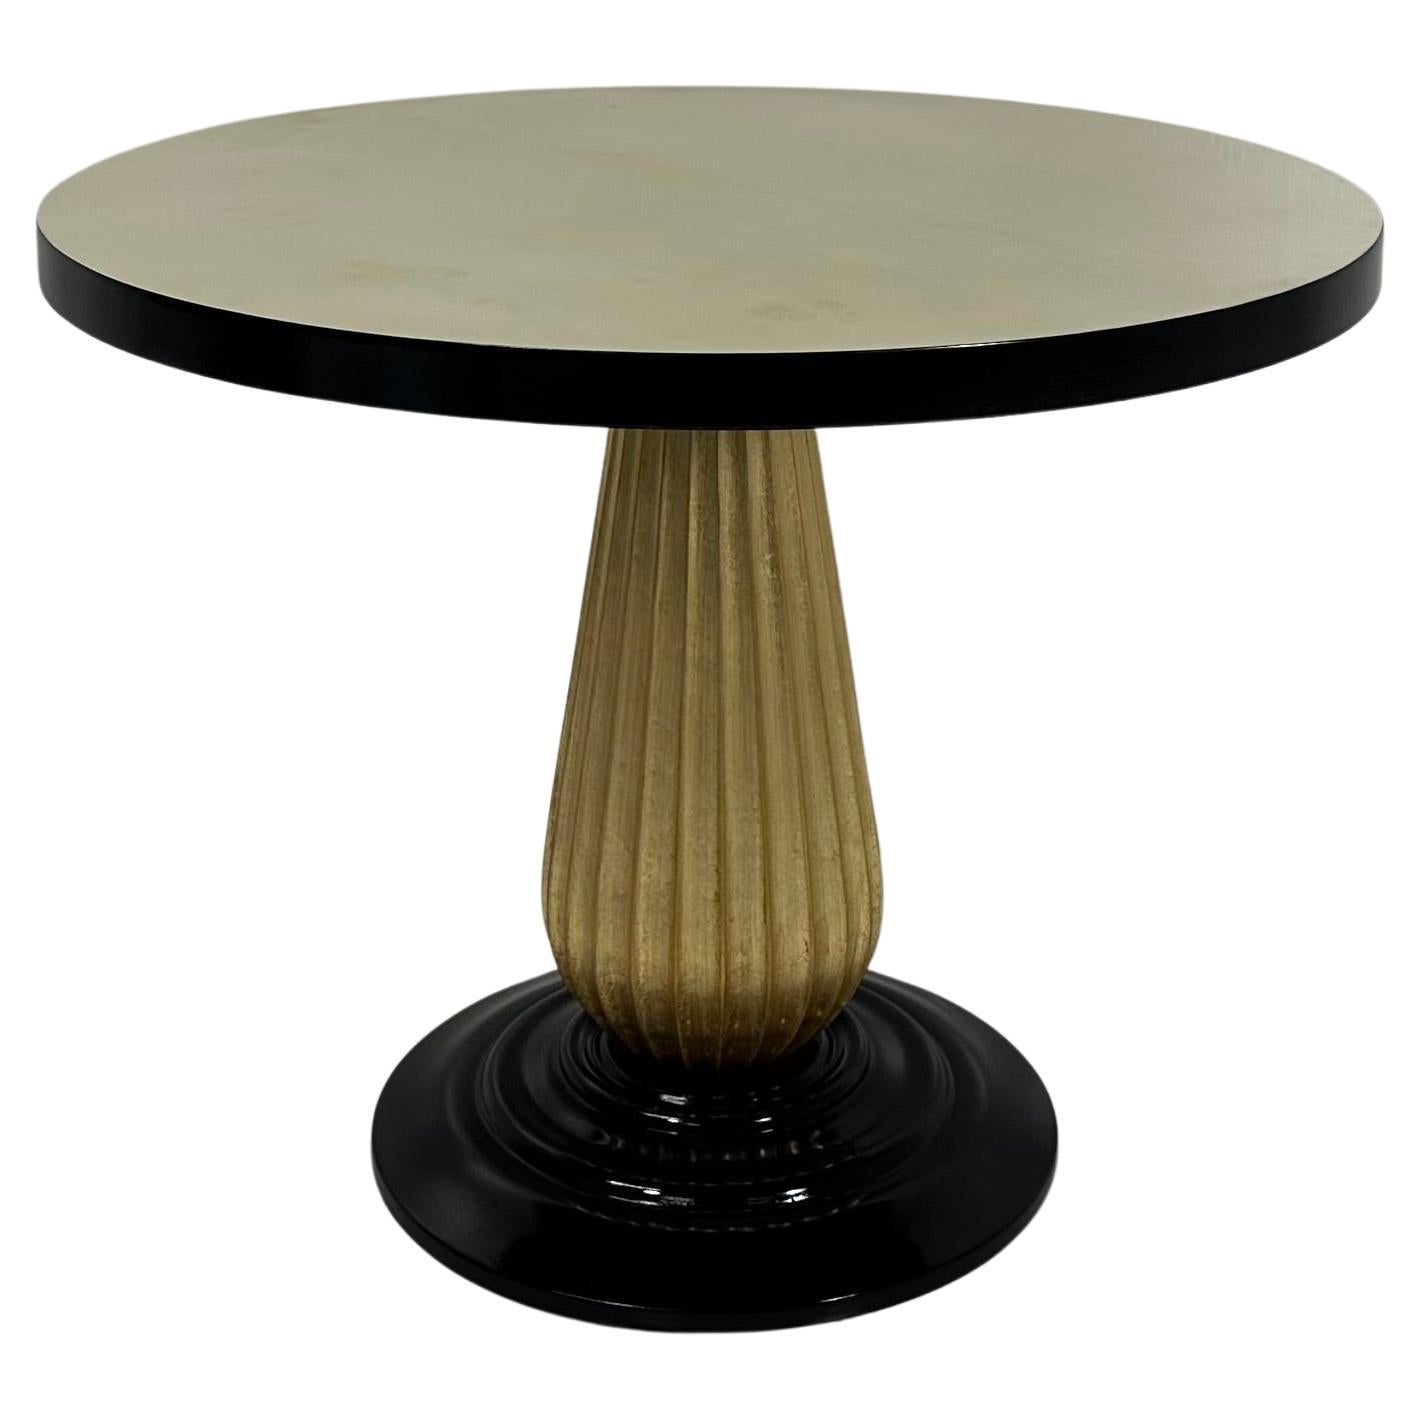 Italian Art Deco Style Parchment, Black lacquer and Gold Leaf Coffee Table For Sale